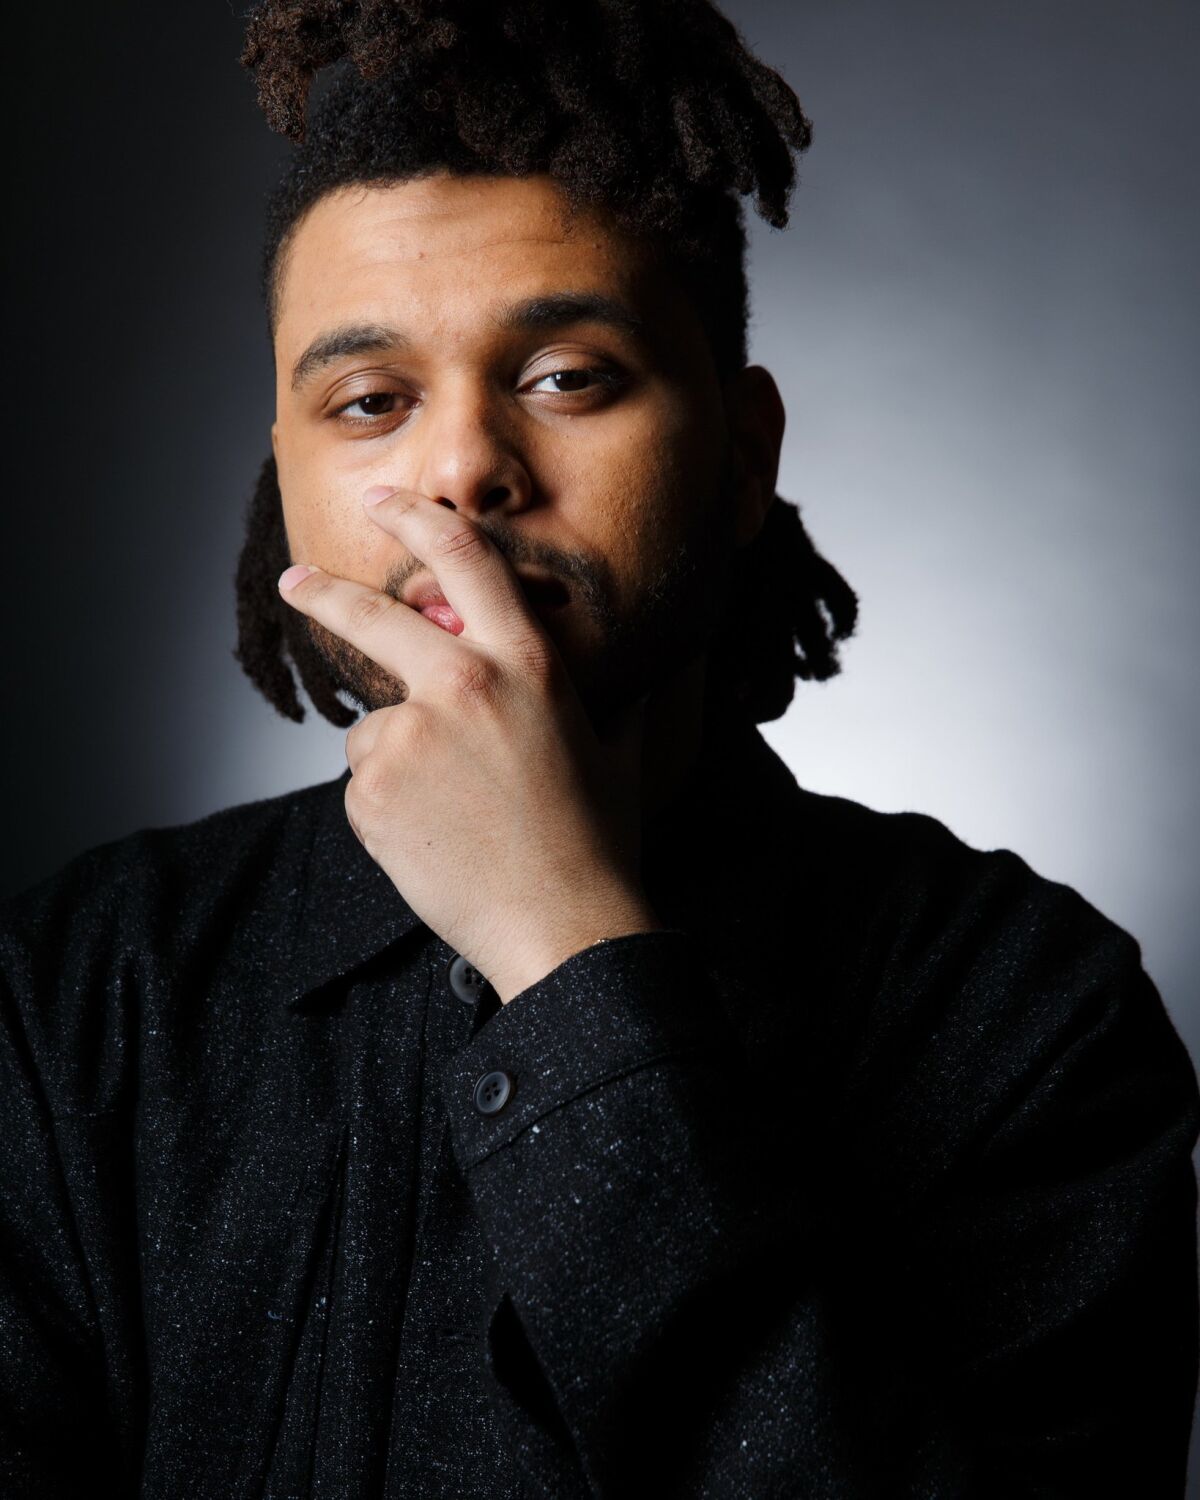 LOS ANGELES, CALIF. -- FRIDAY, FEBRUARY 5, 2016: Abel Tesfaye, better known as the Weeknd, poses during a portrait session in Los Angeles, Calif., on Feb. 5, 2016. (Marcus Yam / Los Angeles Times)